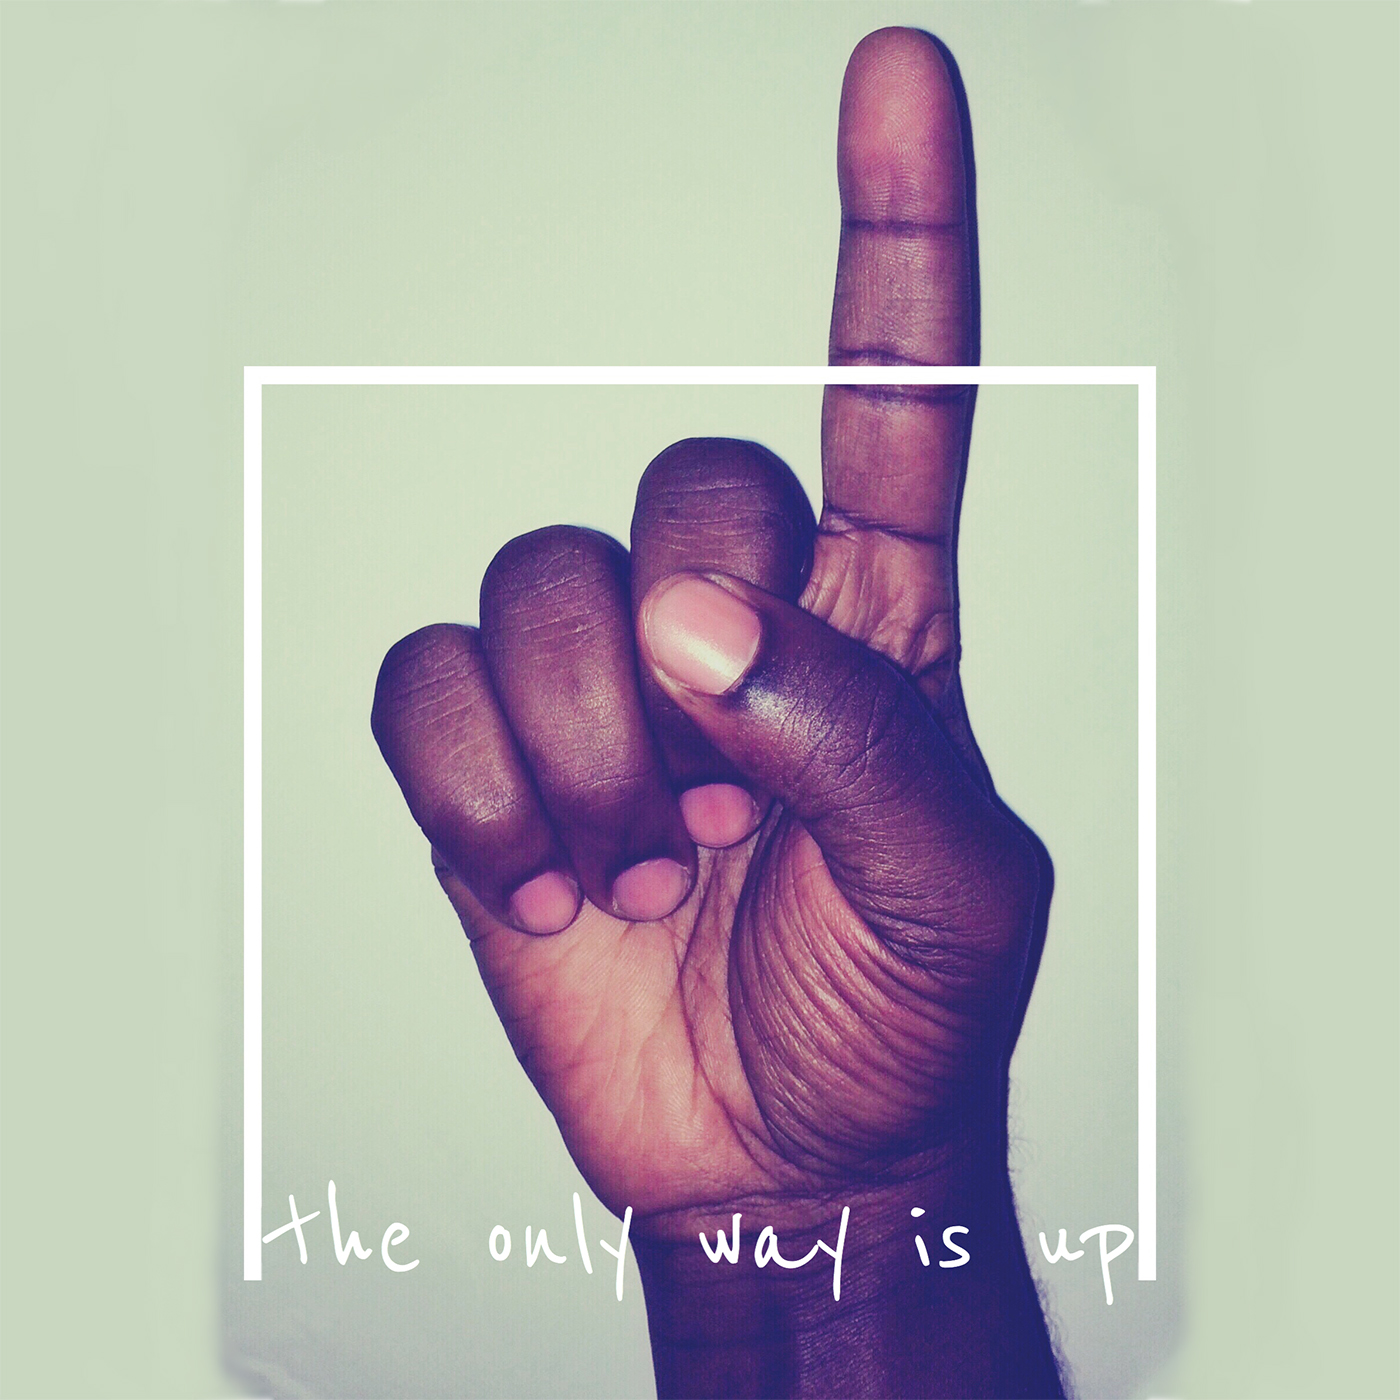 This is the way is world. This is the way обои. This is the way картинка. The only way is up. This is the way logo.